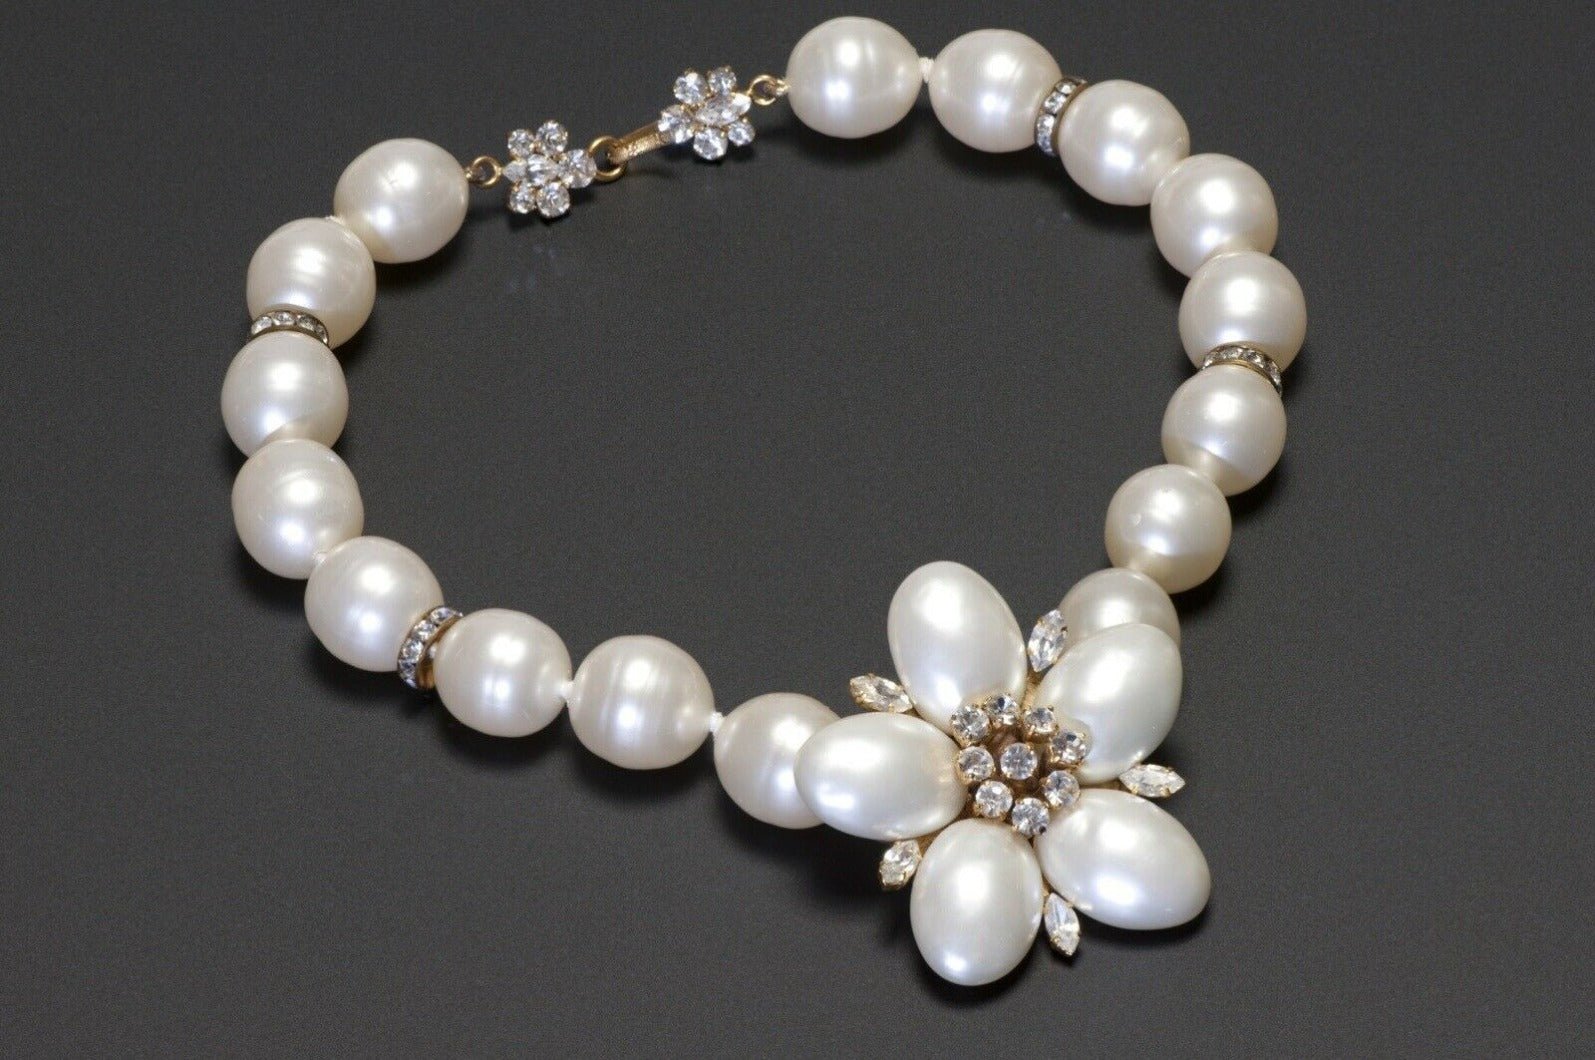 CHANEL Paris 1990’s Faux Pearl Glass Crystal Camellia Necklace